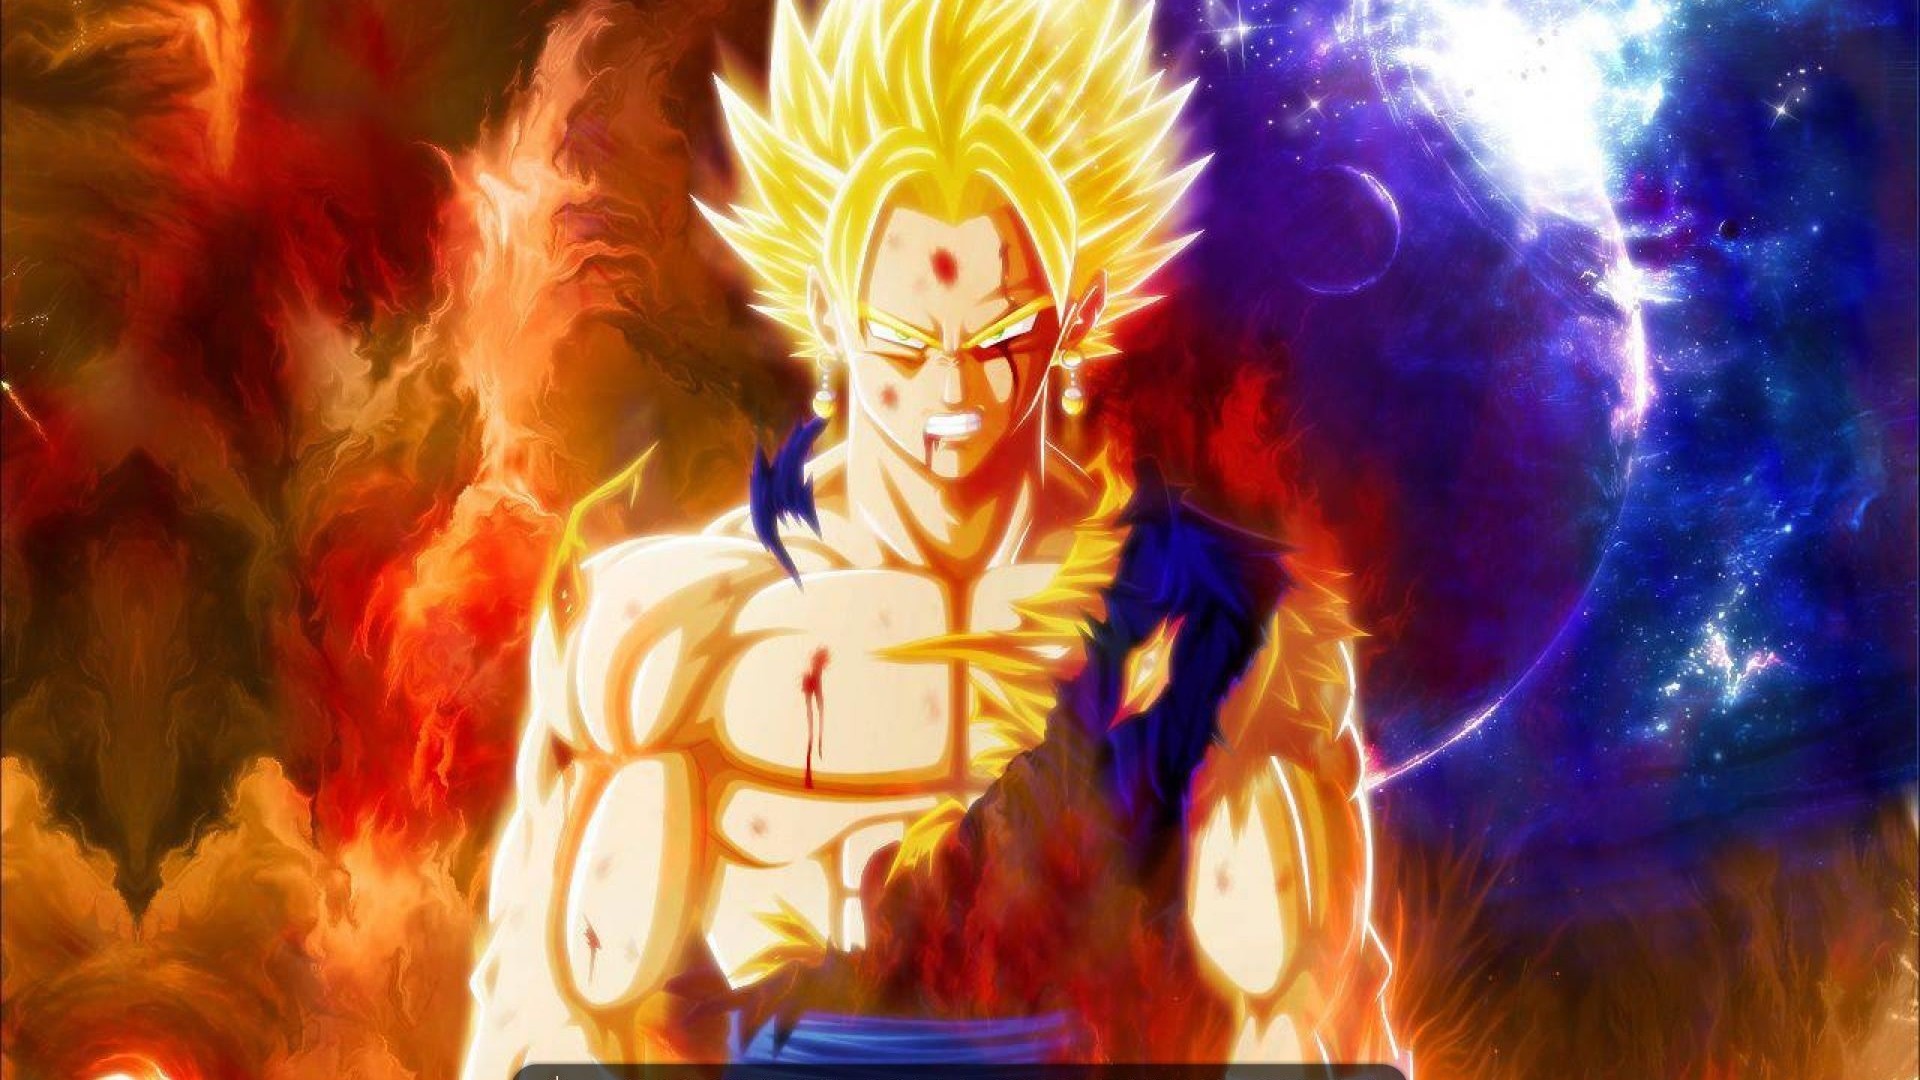 Wallpaper Goku Super Saiyan HD with image resolution 1920x1080 pixel. You can make this wallpaper for your Desktop Computer Backgrounds, Mac Wallpapers, Android Lock screen or iPhone Screensavers